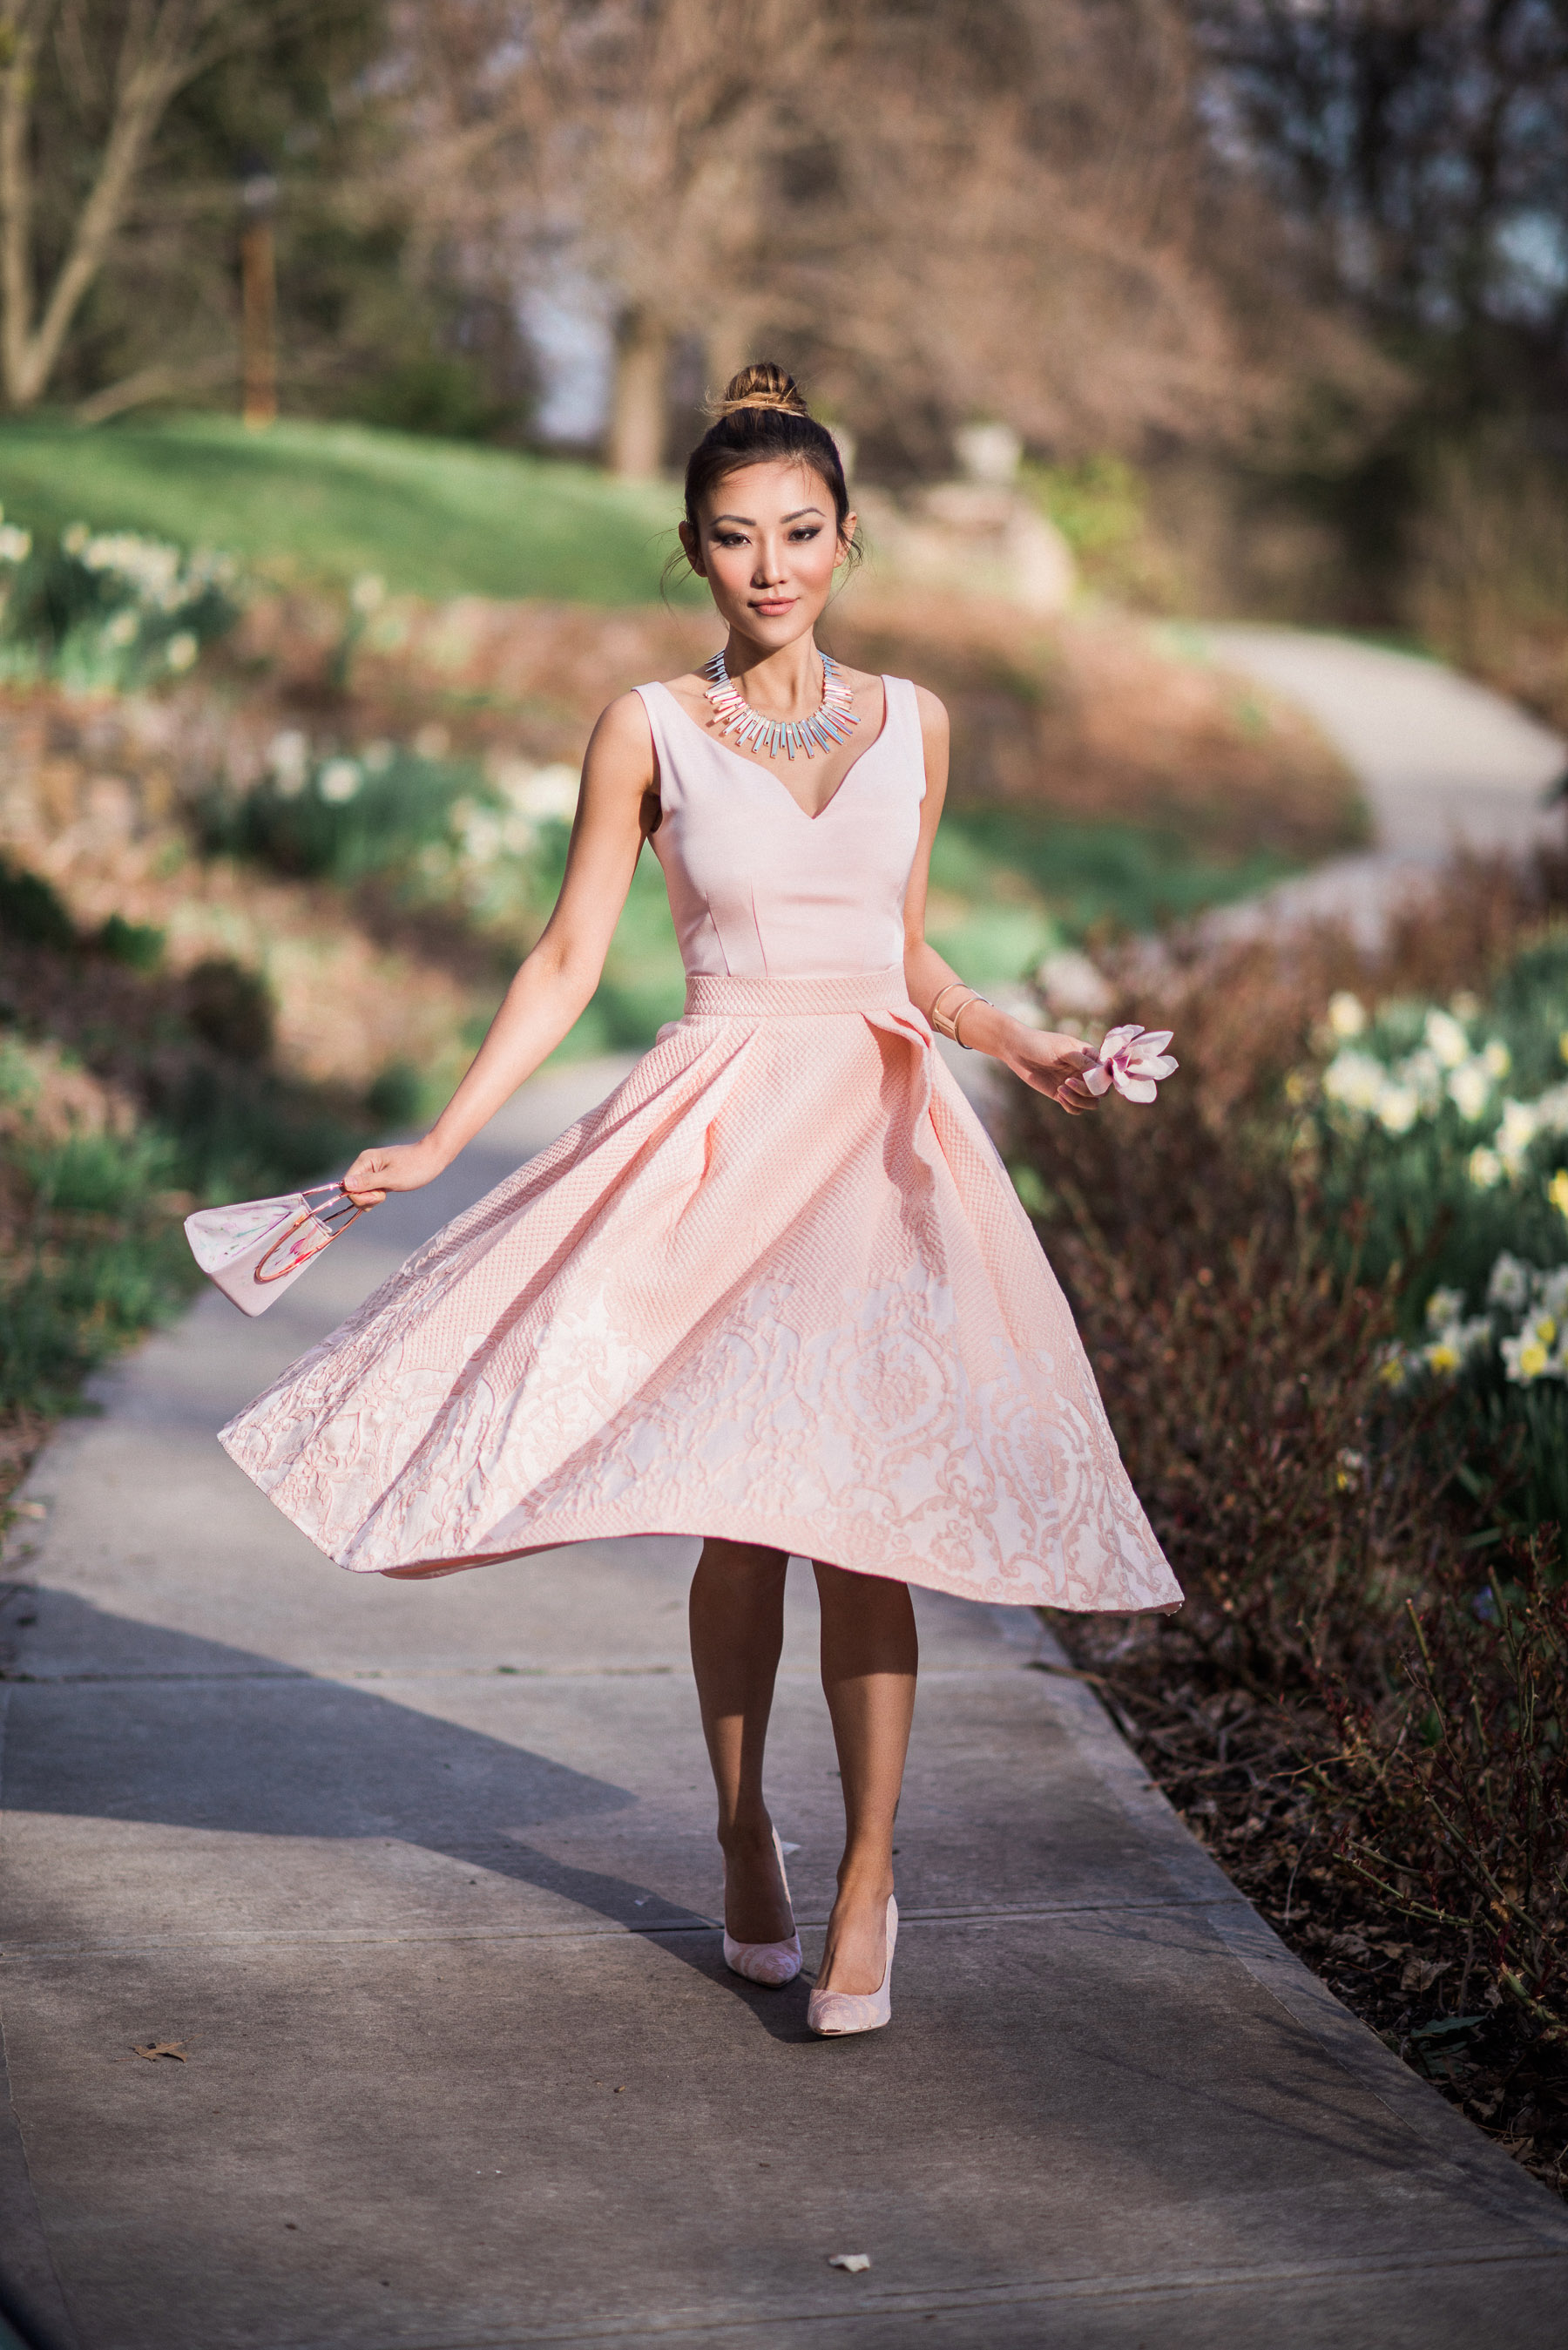 Dresses to Get You Through Easter - pastel pink dress for easter // NotJessFashion.com